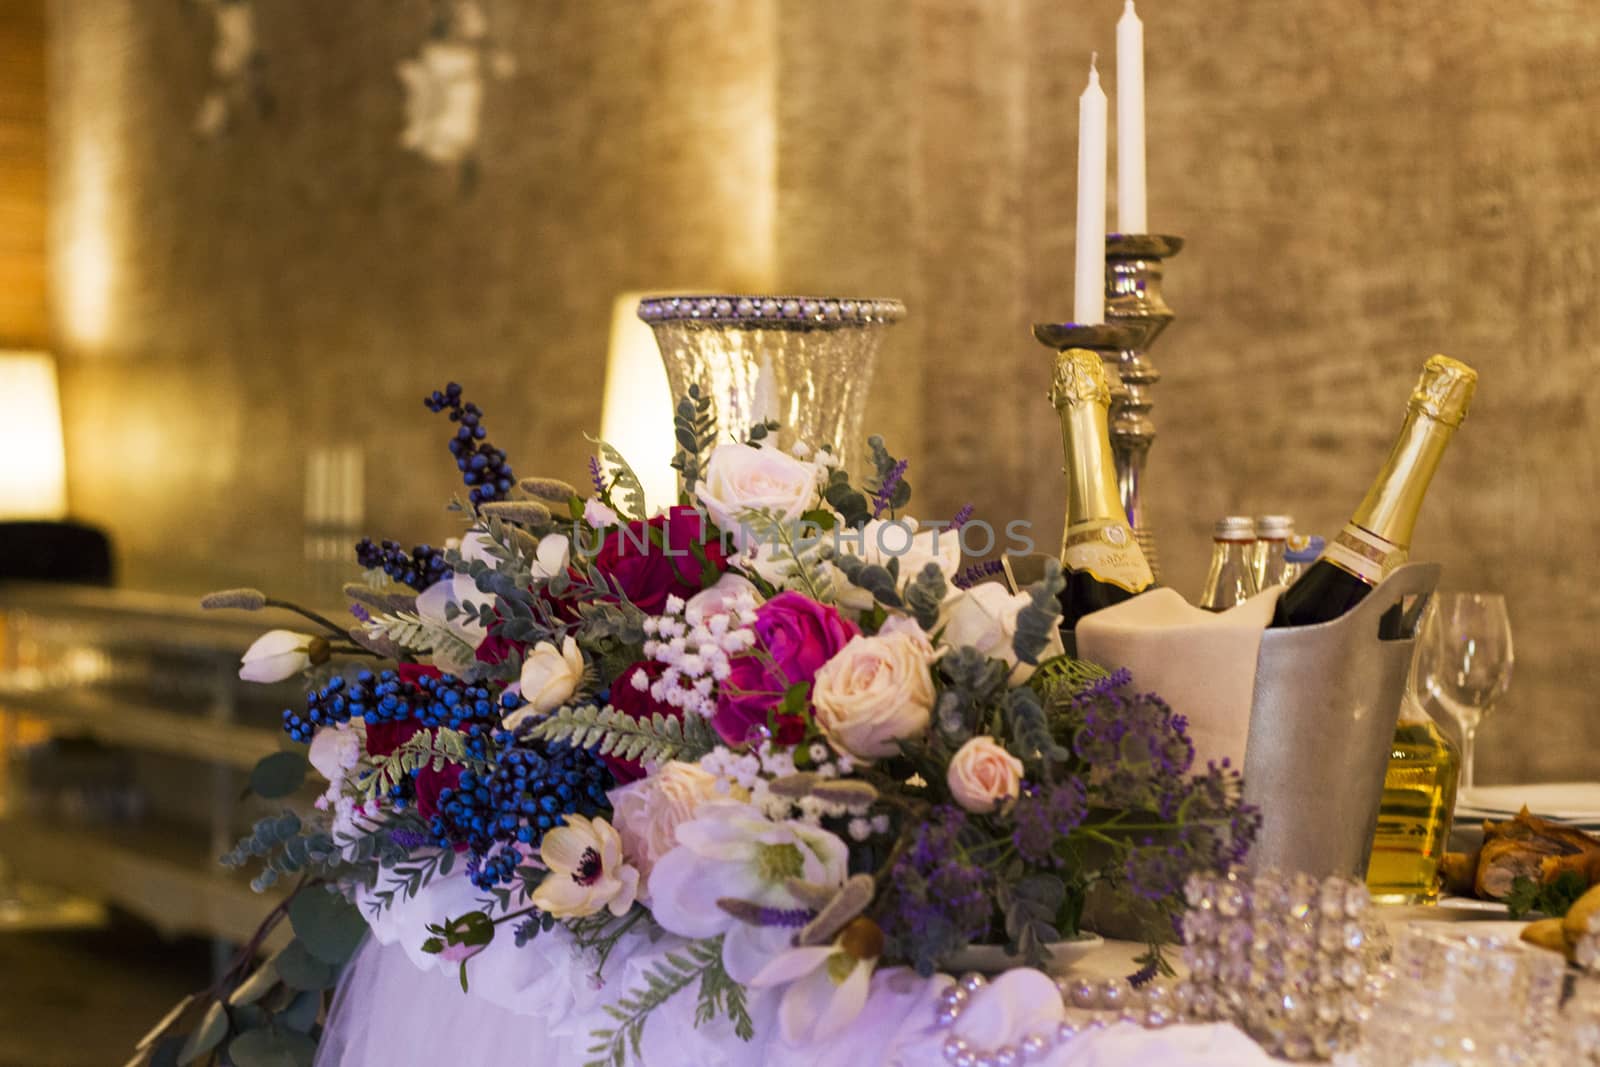 Wedding table design with flowers, candles and lights